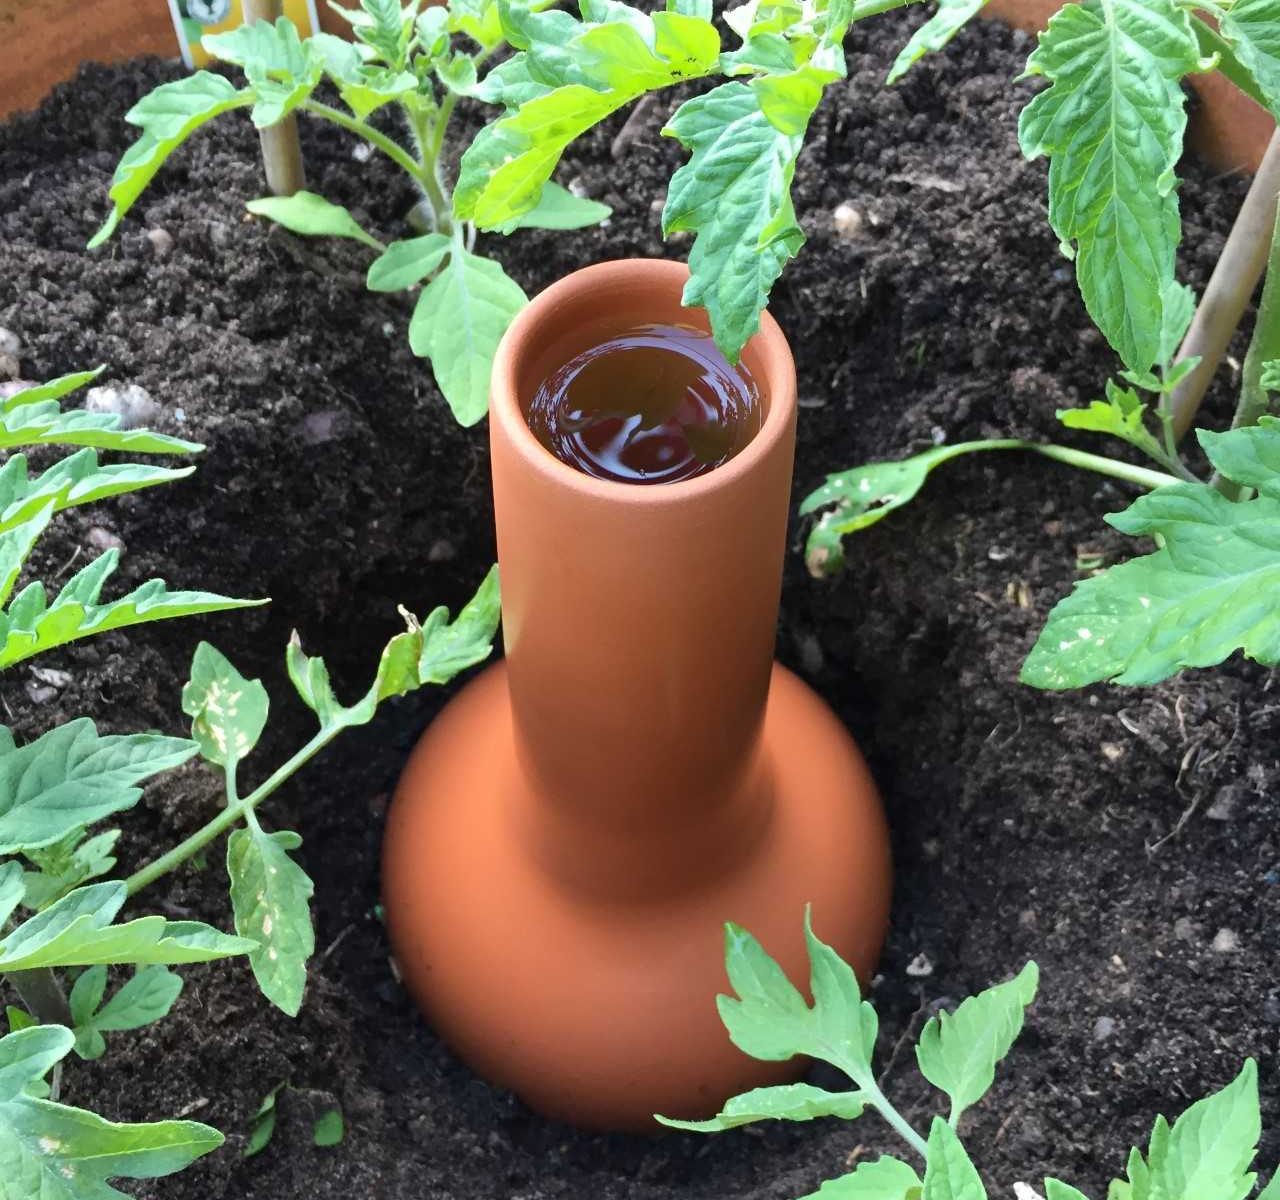 Weston Mill Pottery’s large olla irrigation pots are ideal for use in larger patio containers and greenhouses wmpot.co.uk